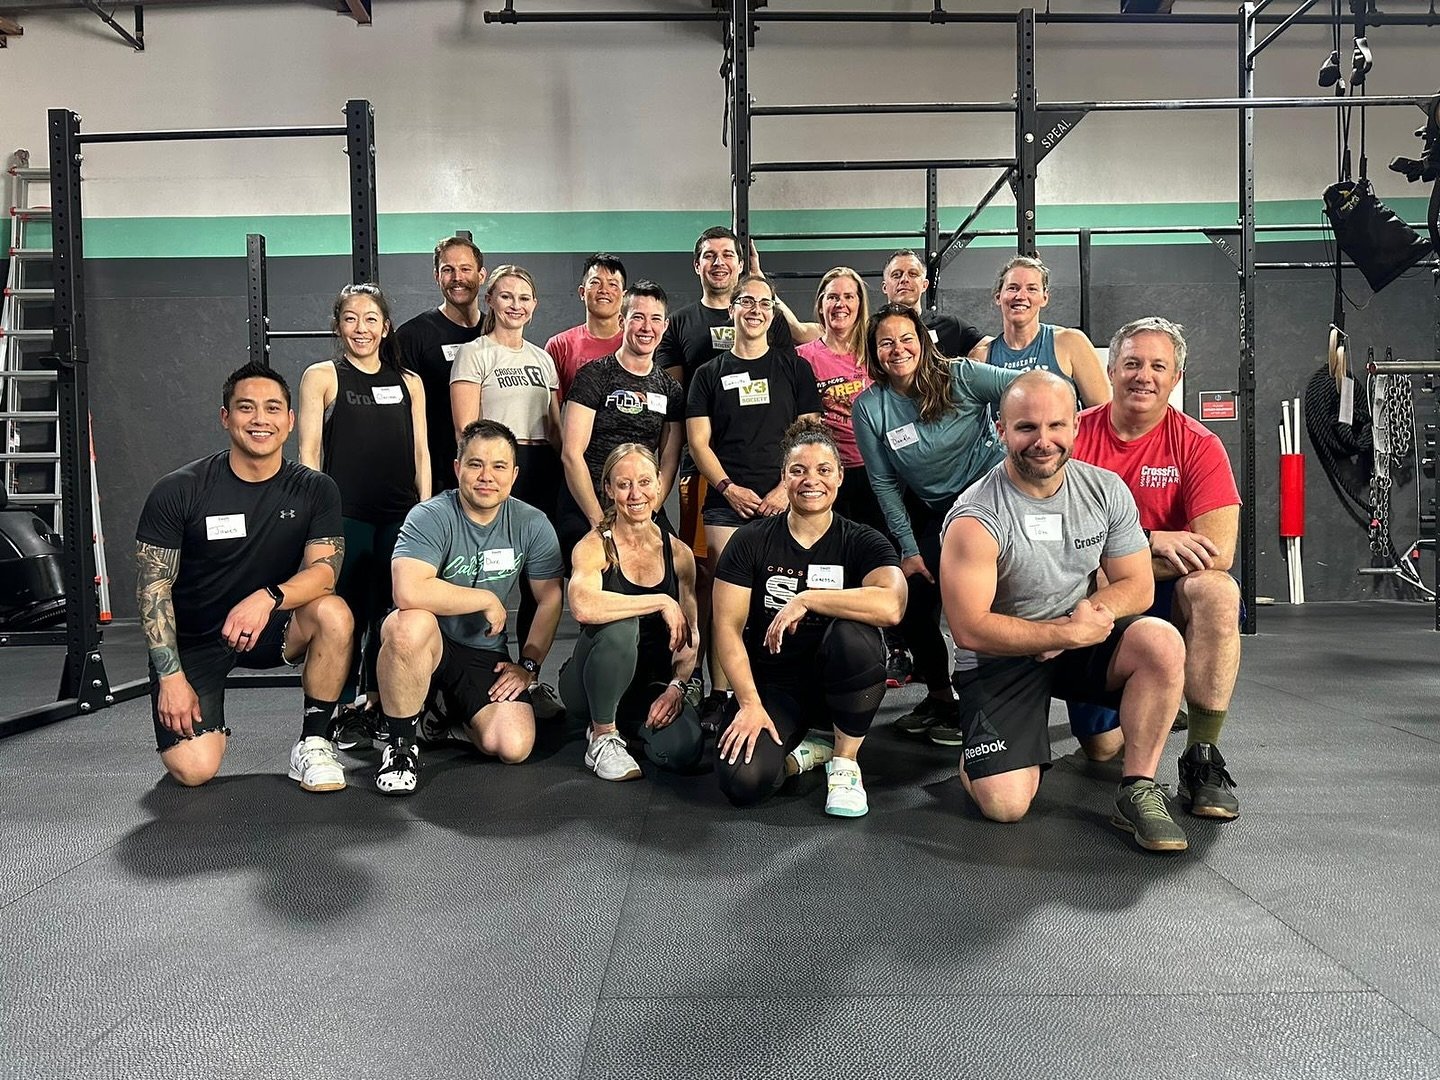 Congrats to Coach Canessa on getting her CrossFit L2 Certification! @canessa21 Check her out in the front row repping CrossFit South Park!